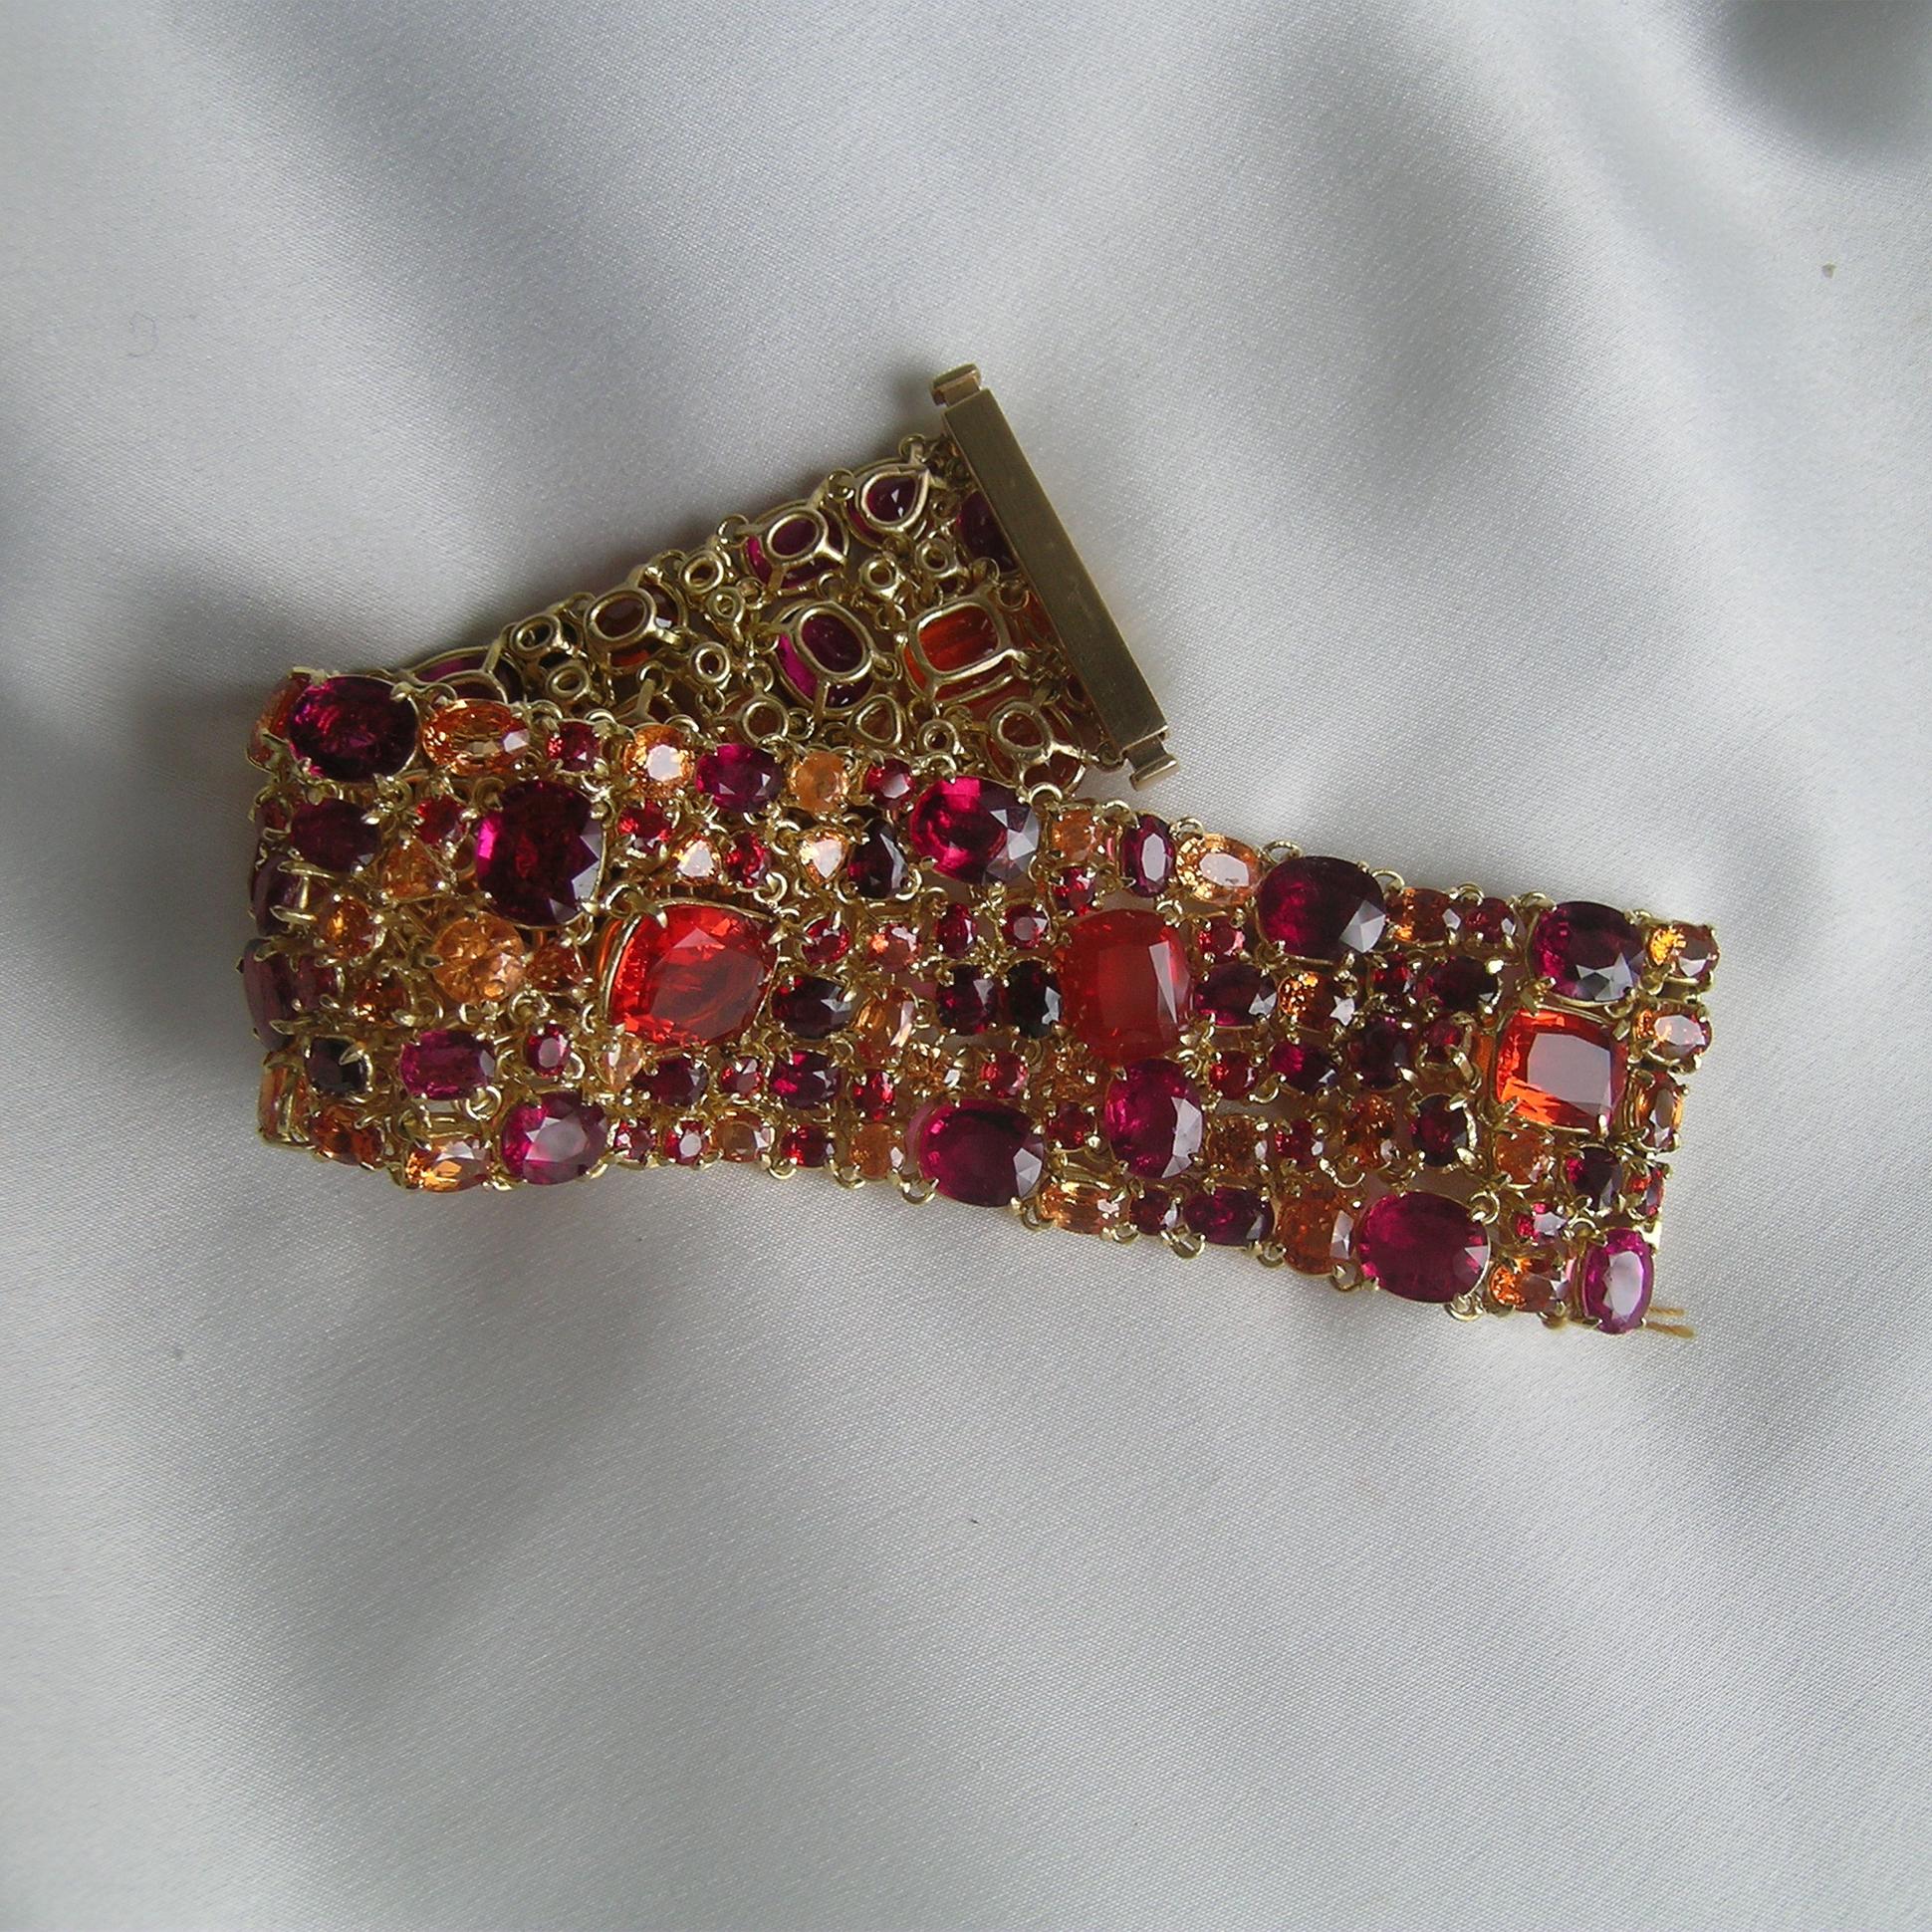 Over 100 carats of Fire Opals, Red Sapphires, Spessartite Garnets, Rubelite Tourmaline are used to make this bold, statement piece.  Set in 18k Gold, this item is hand made and takes over two months to construct.
It is comfortable and fits like a